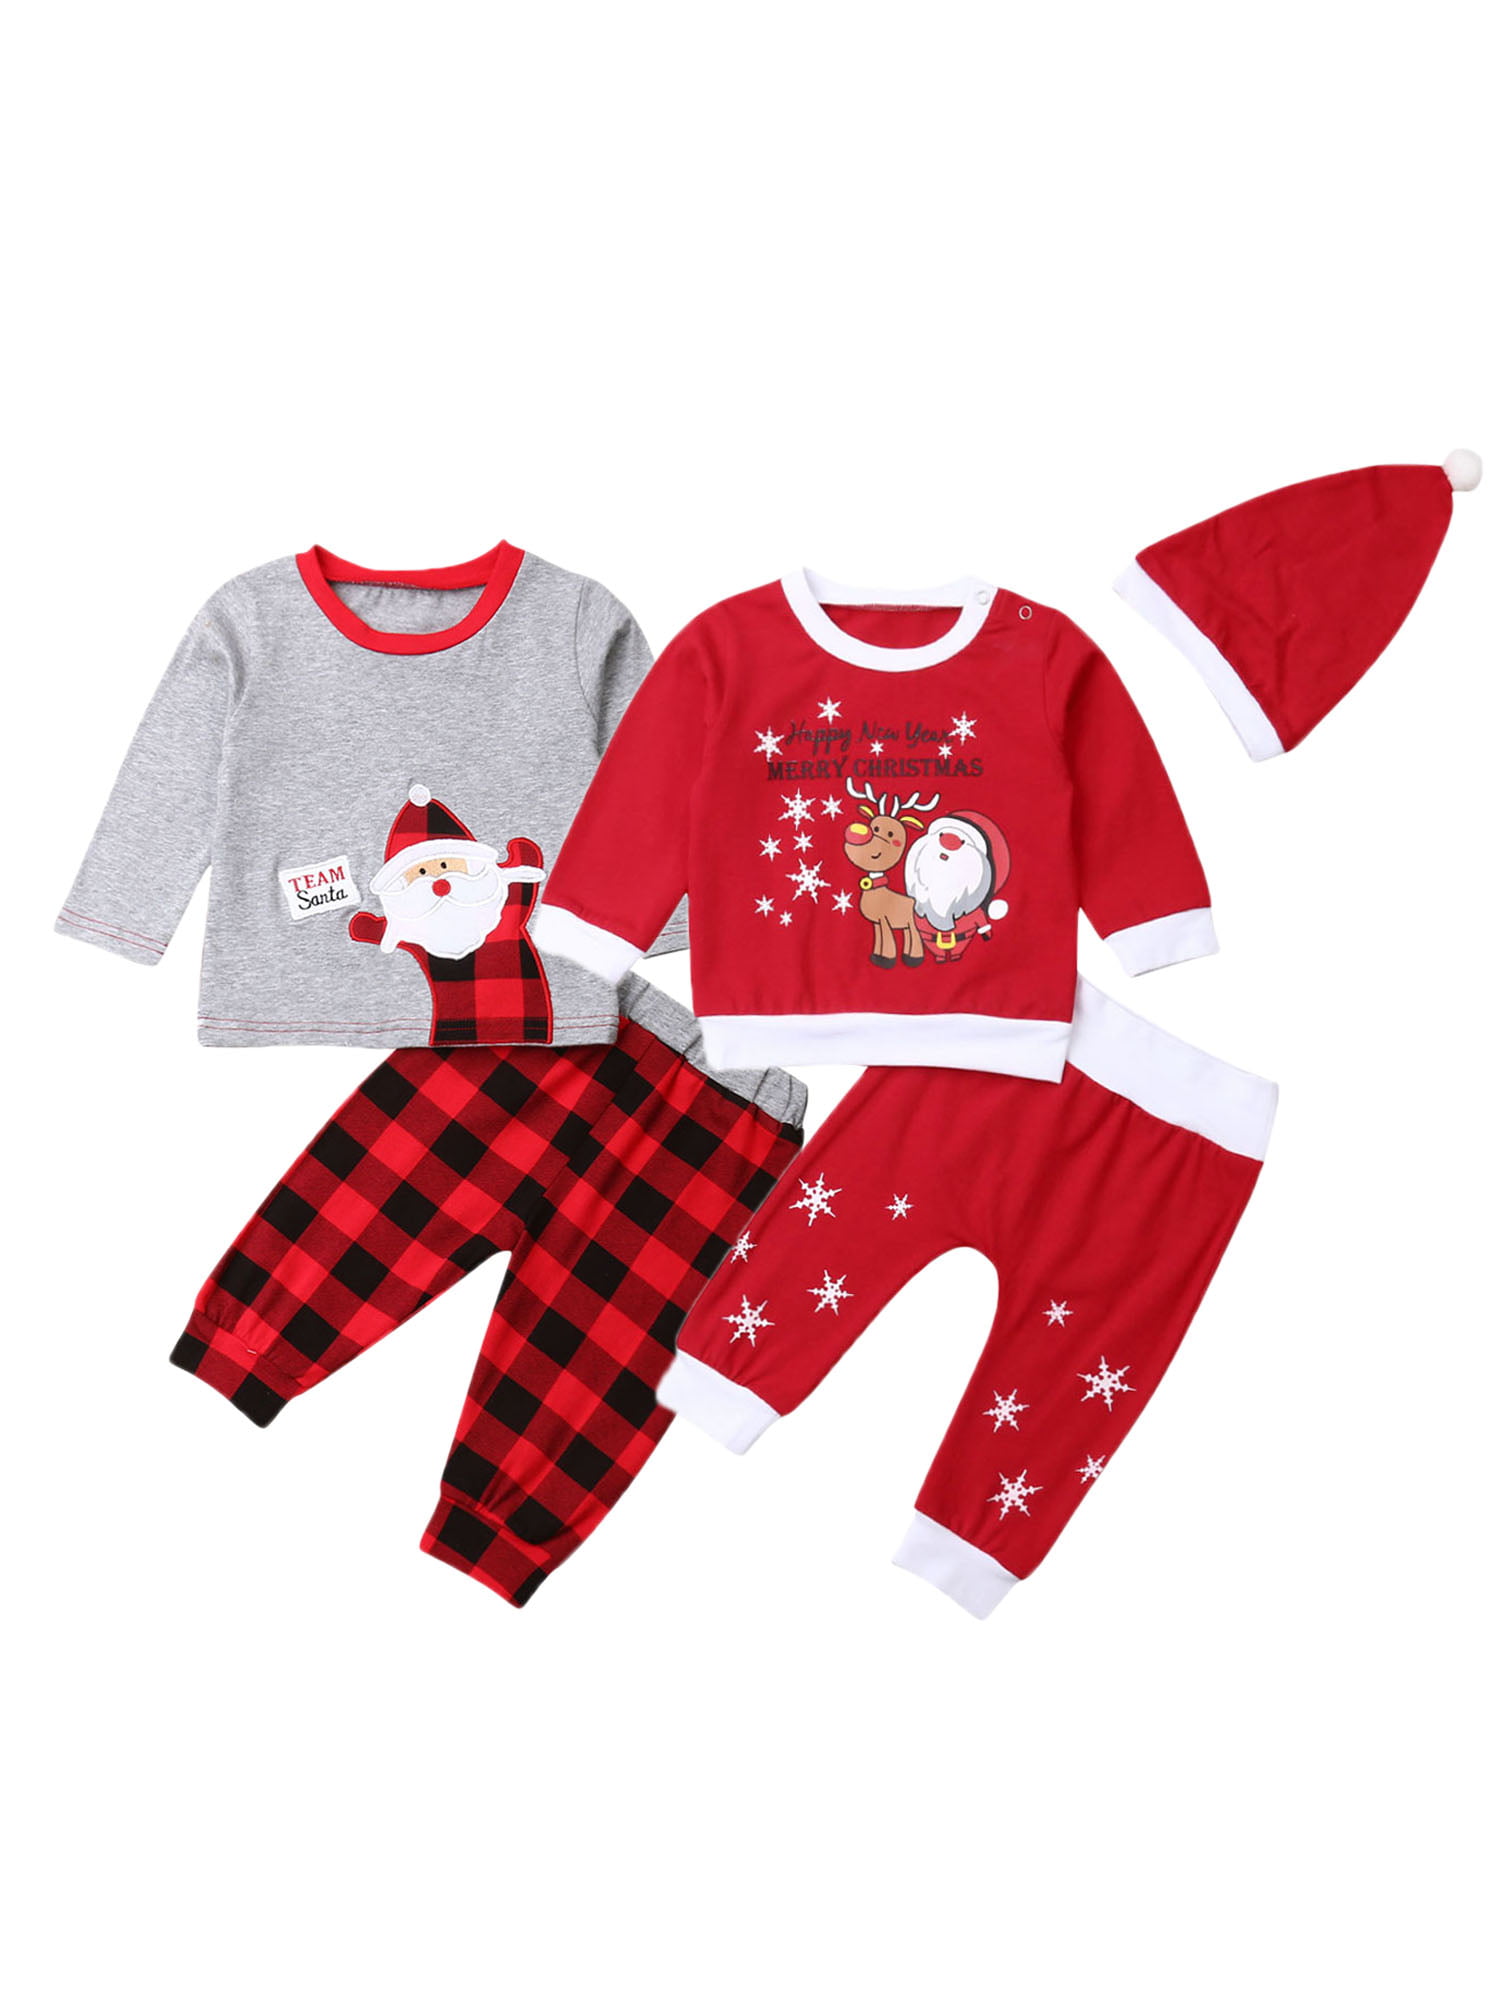 Pants Outfits Newborn Infant Baby Girl Boy Christmas Clothes Jumpsuit Romper 